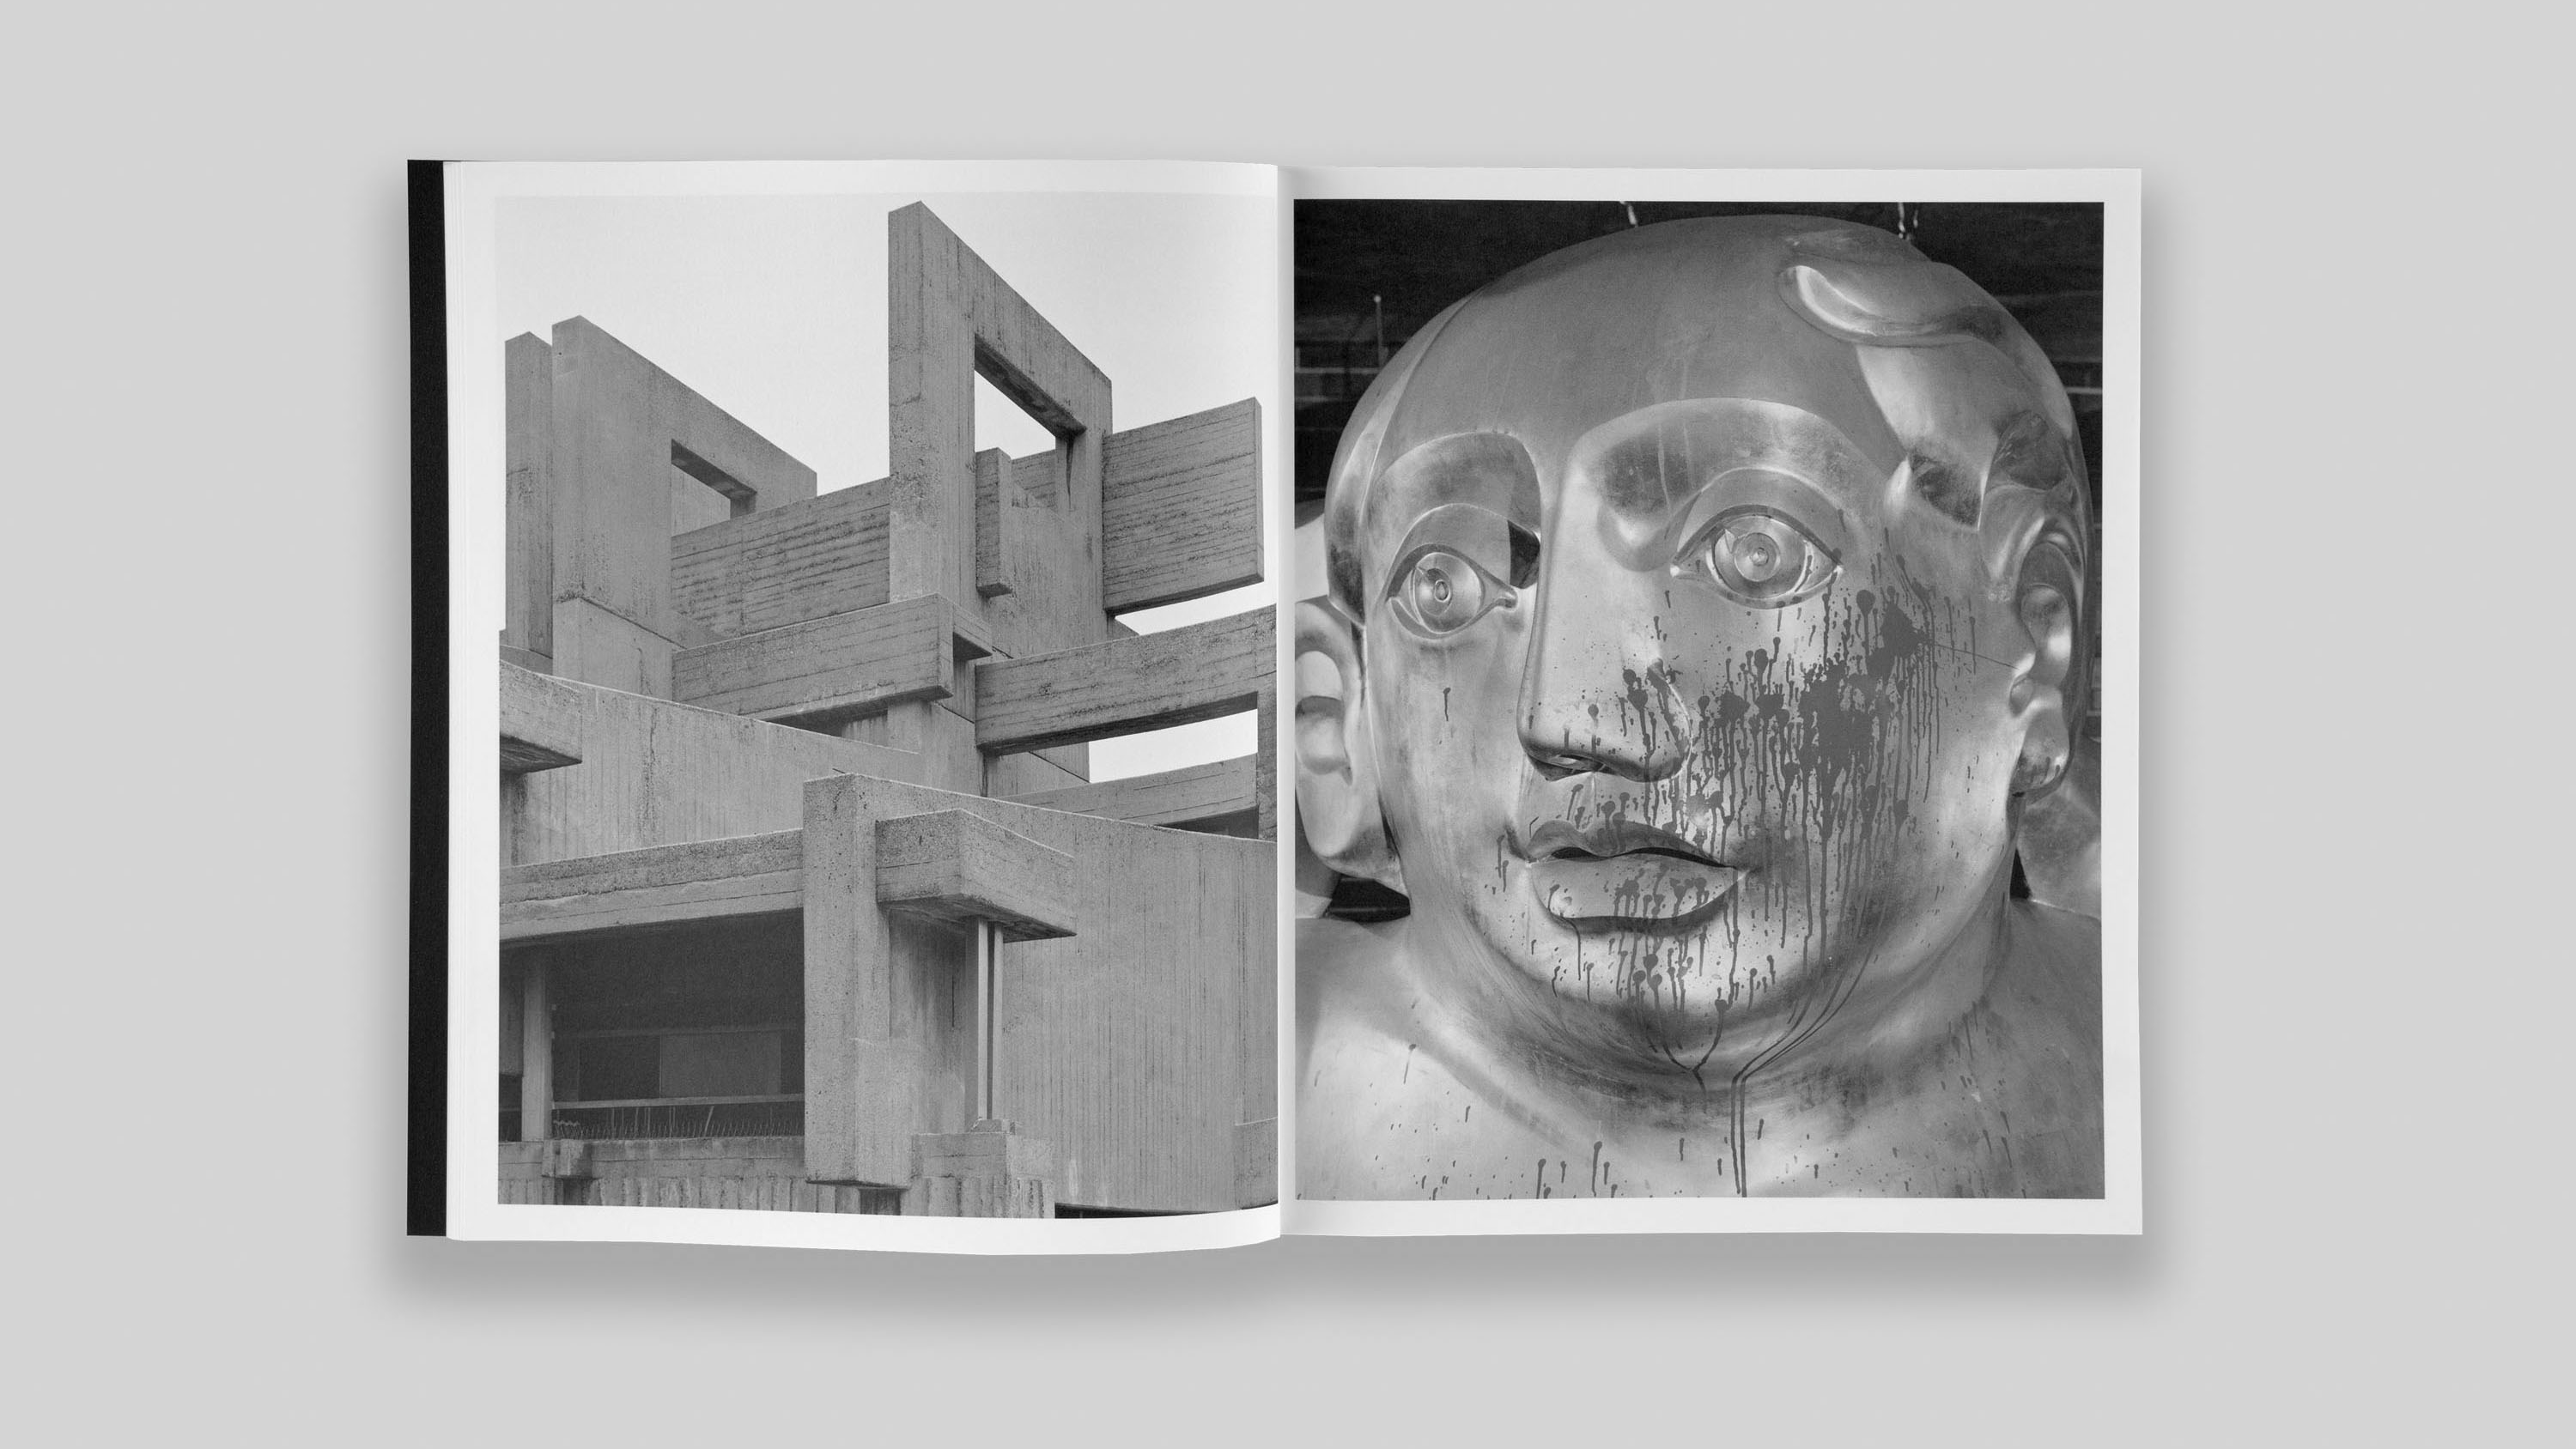 bertrand cavalier concrete doesn't burn book published by fw:books 2020